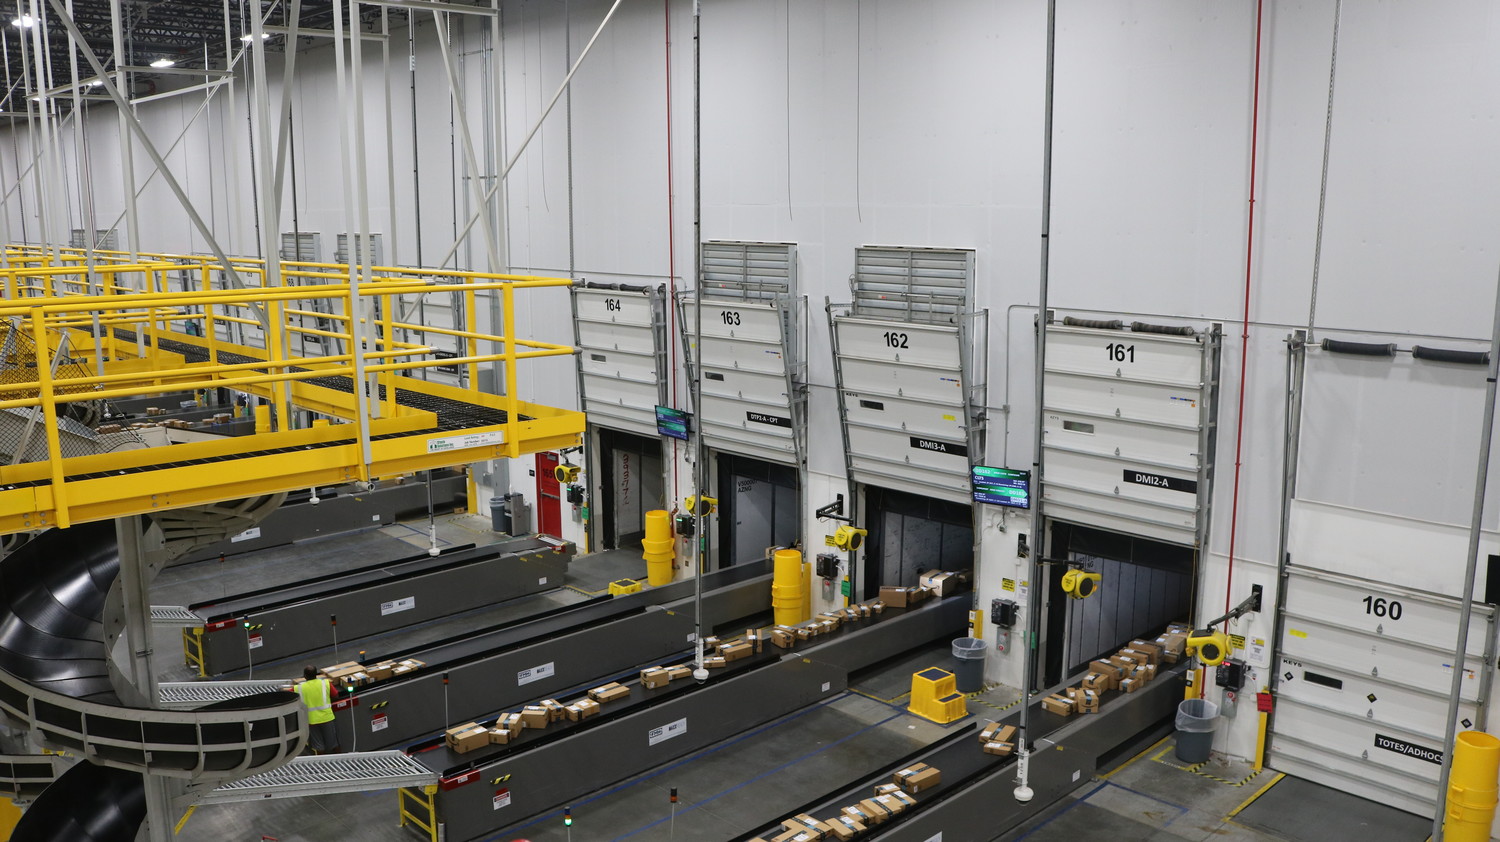 Amazon opened the doors of its new fulfillment center on Jacksonville’s Northside to elected officials and community leaders on April 6 as part of a special grand opening event. The new facility began operating last year.